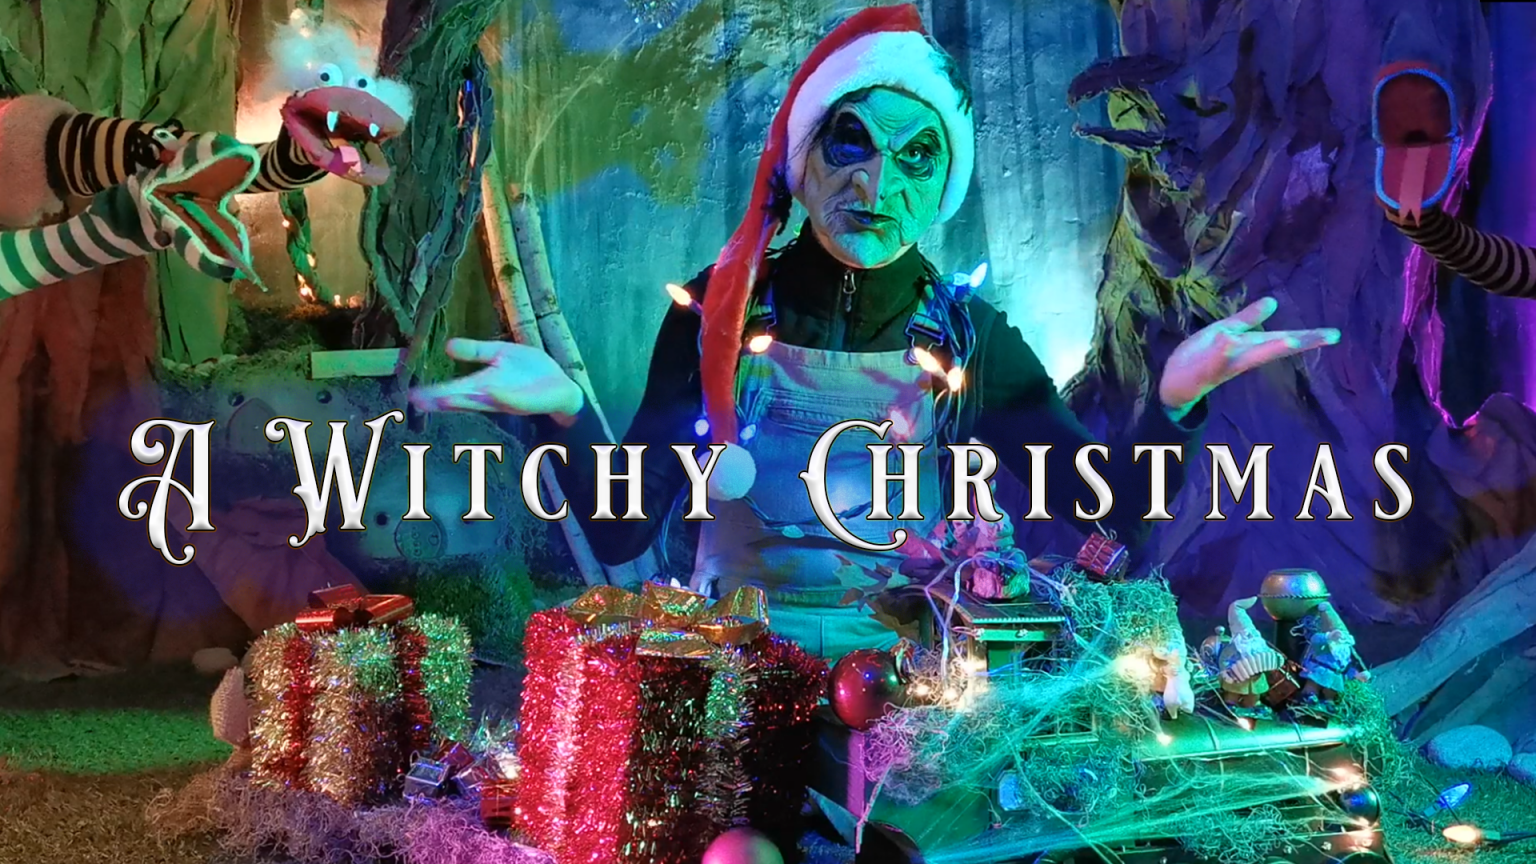 A witchy Christmas